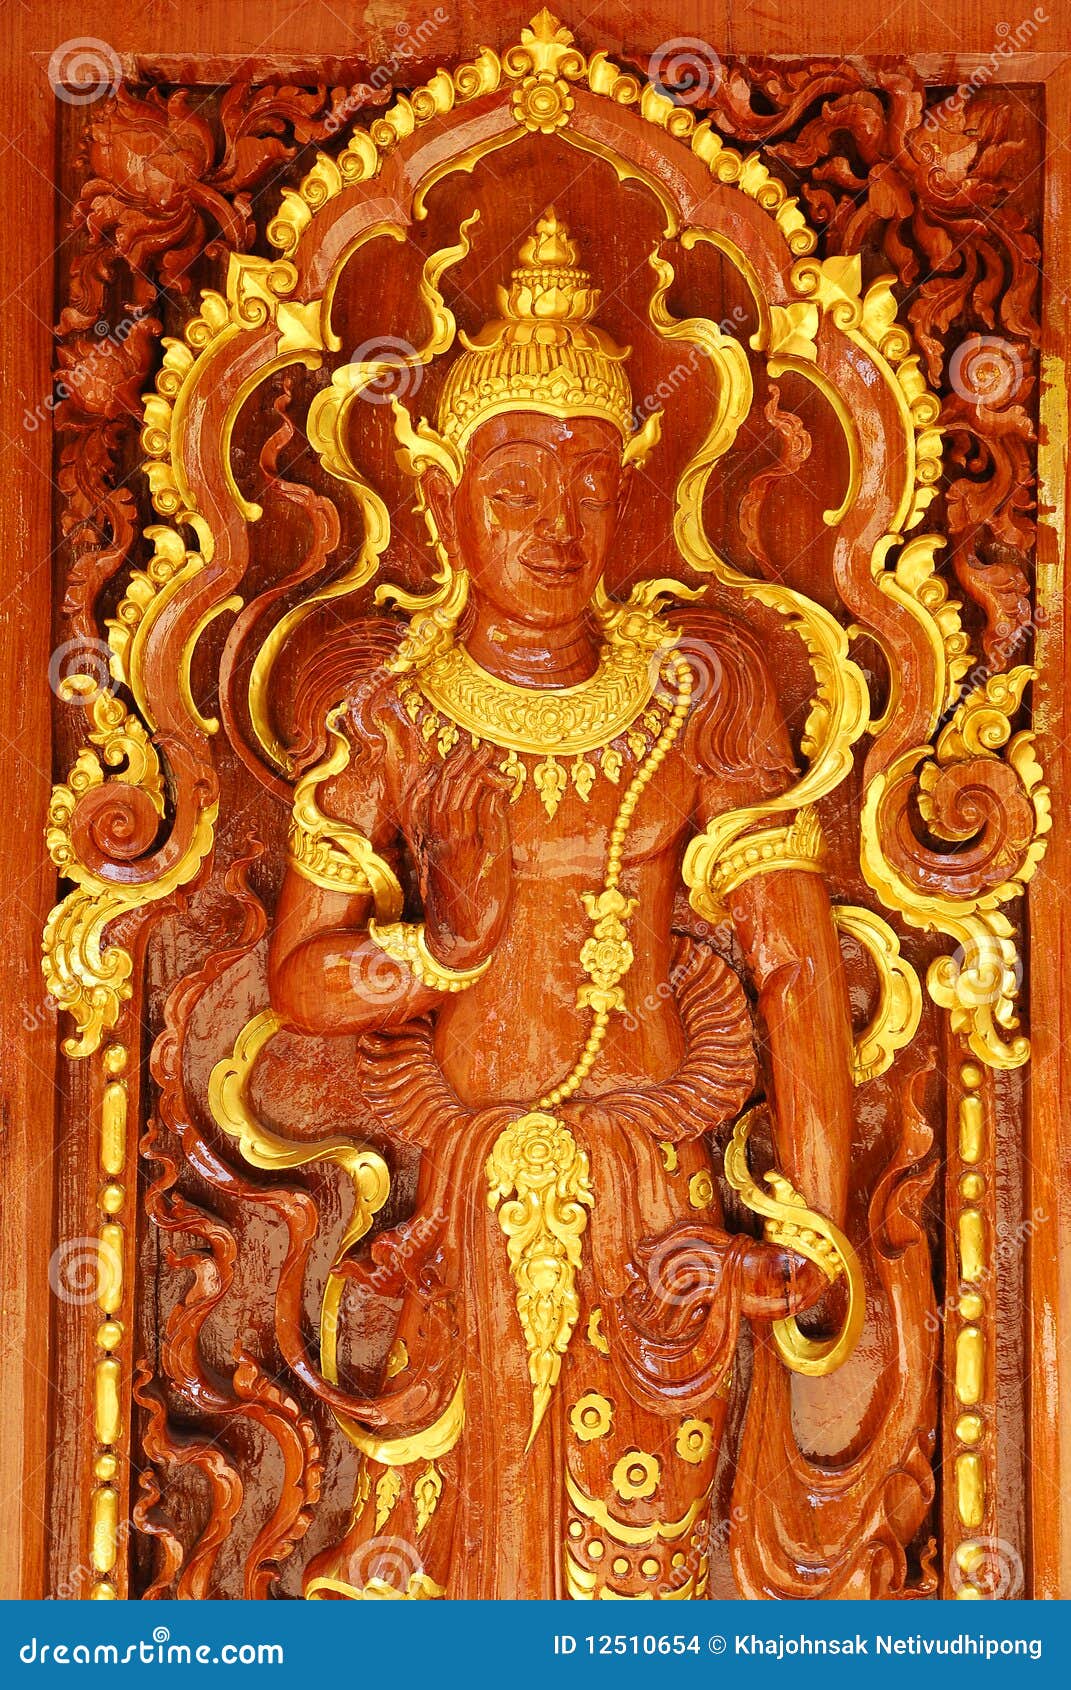 God wood carve stock photo. Image of sculpture, face - 12510654